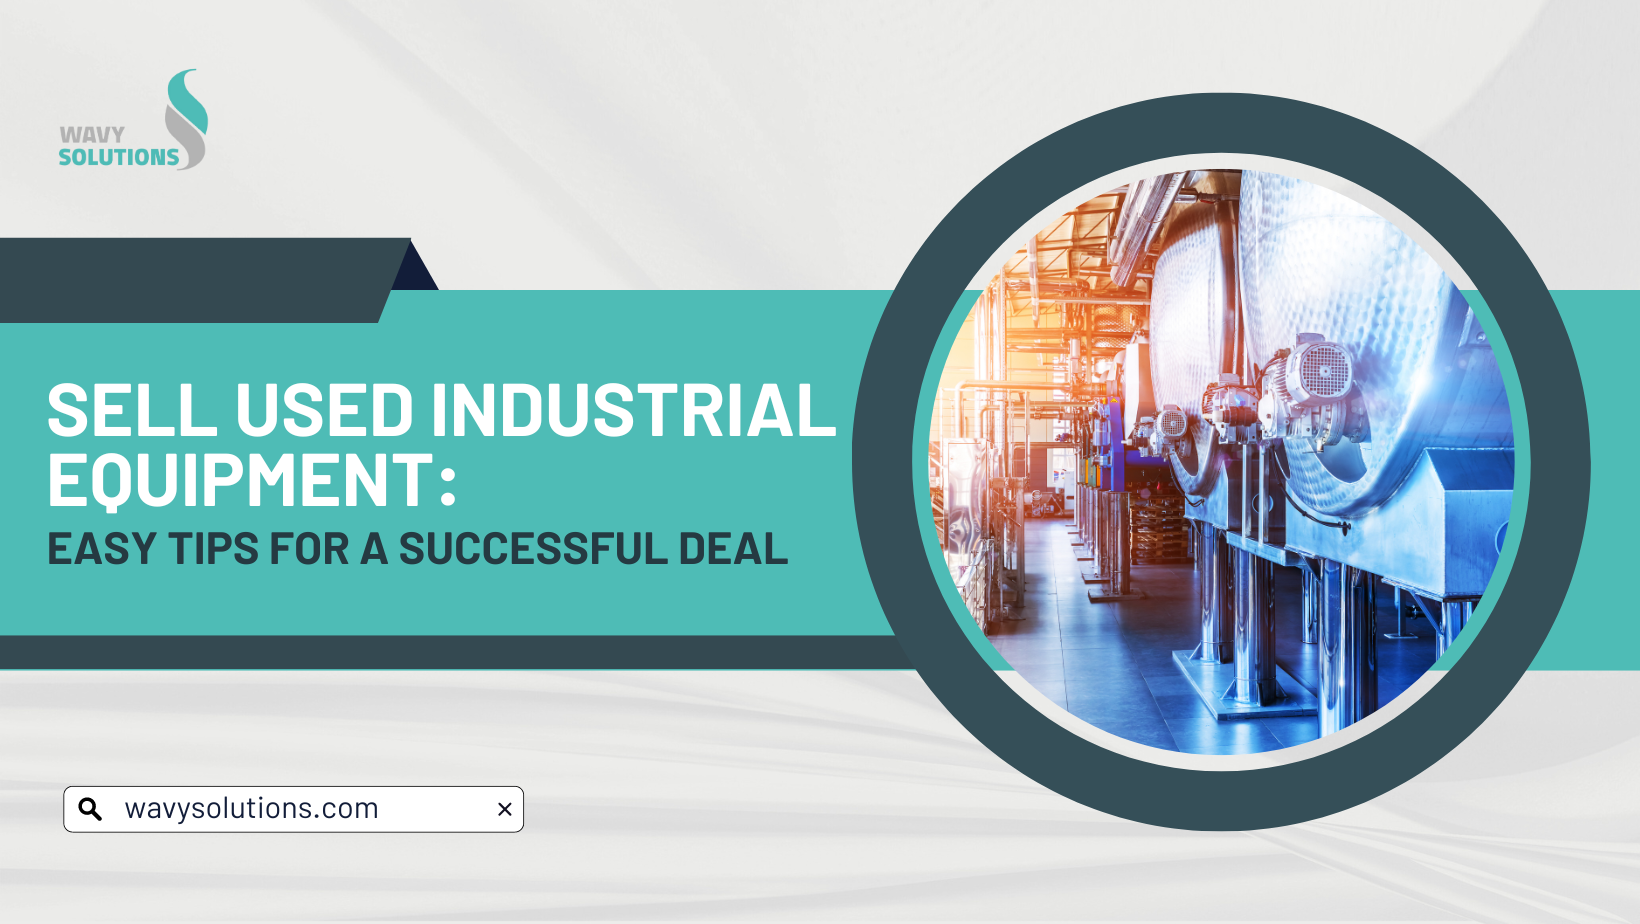 Cracking a Deal to Sell Used Industrial Equipment: Make It Easy with These Proven Tips